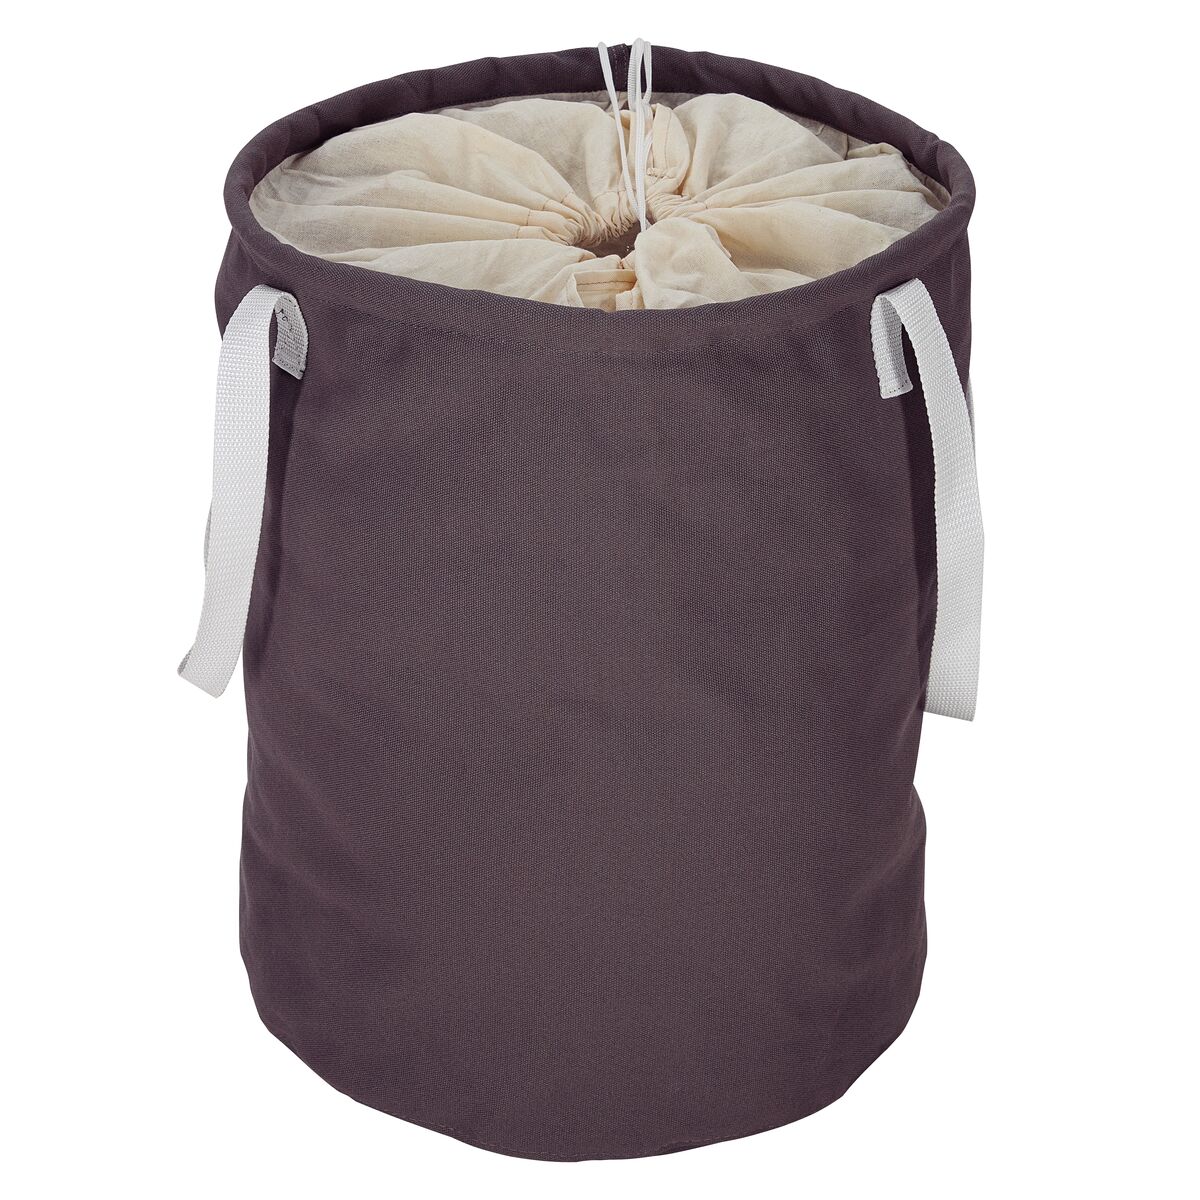 Tramontina Organizer Basket in Gray Canvas with Rope Closure